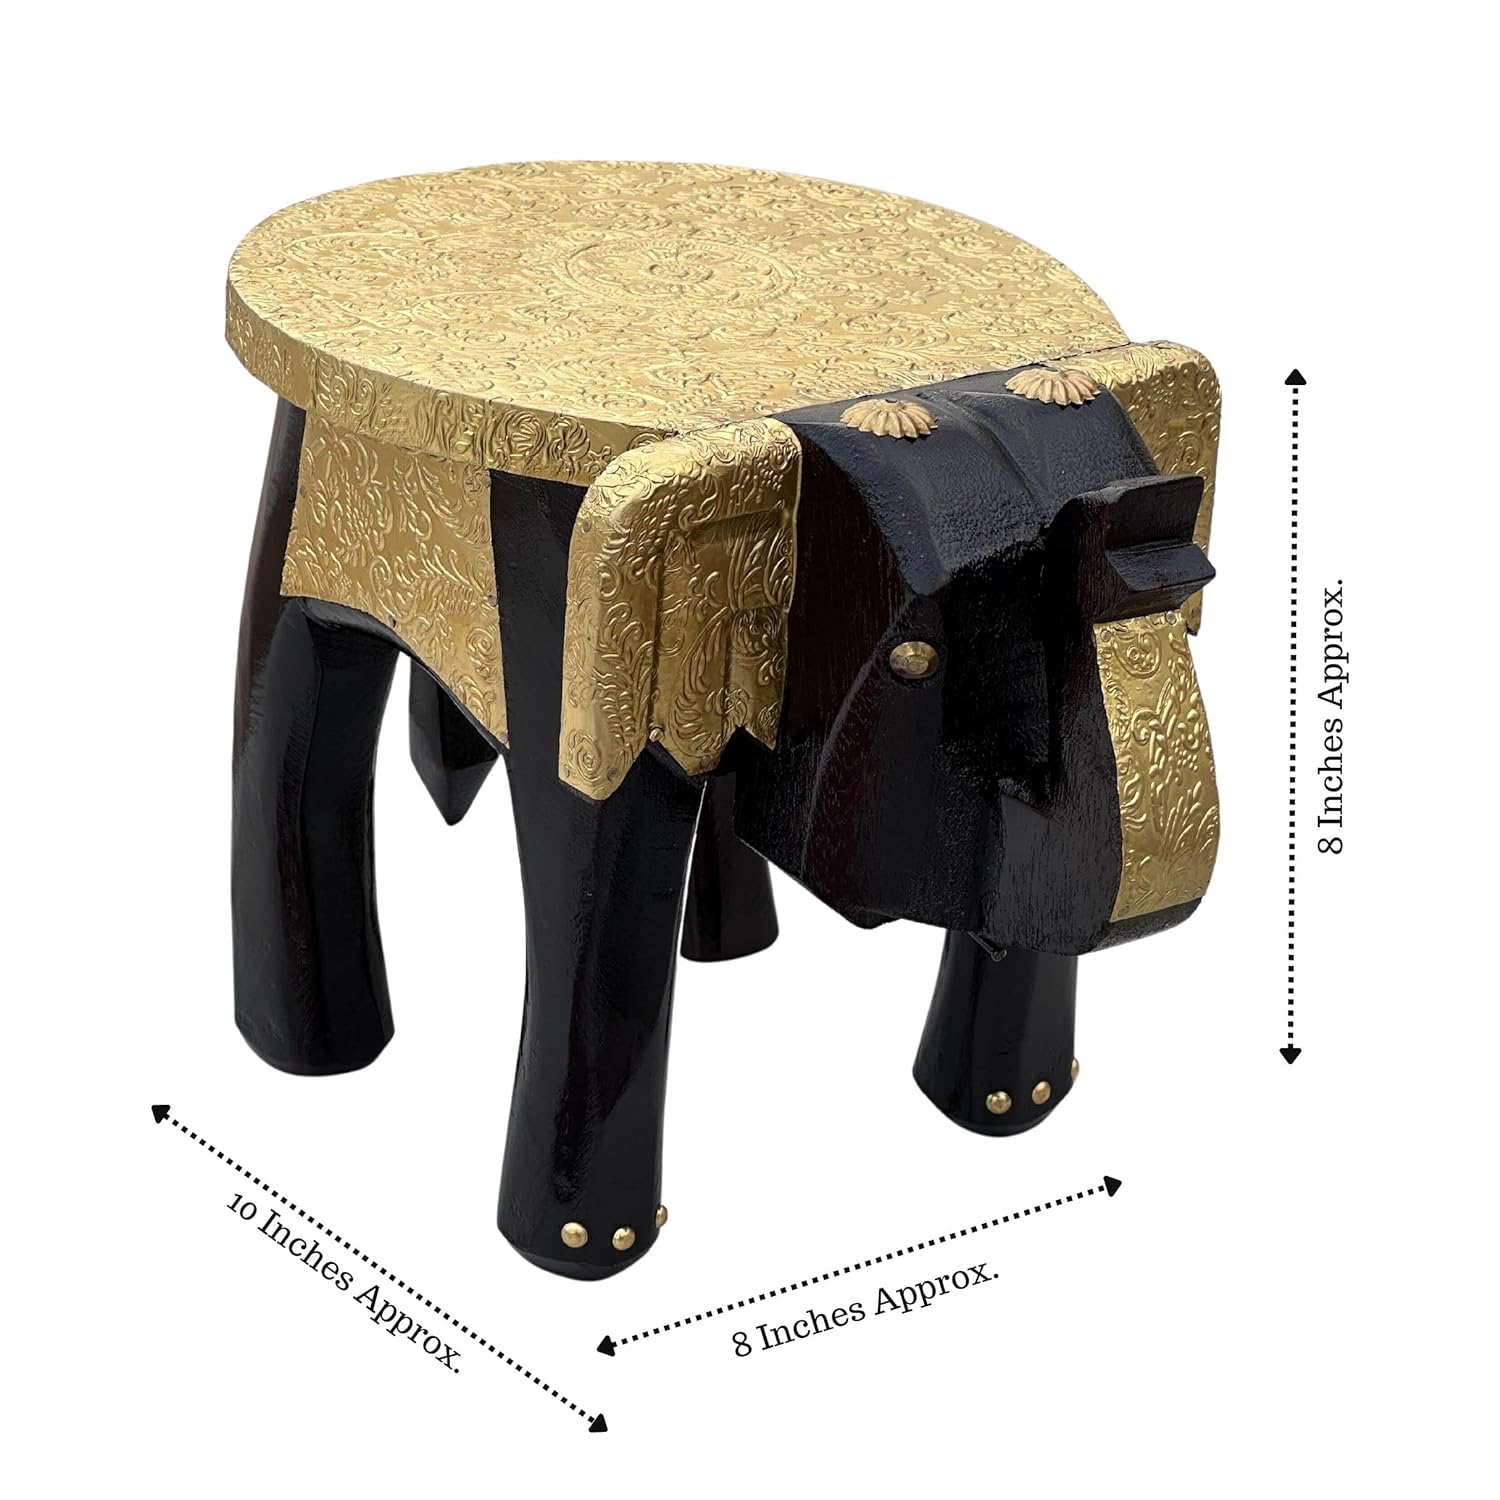 Hand-Painted Colorful Wooden Elephant Stool (Metal Engraved)